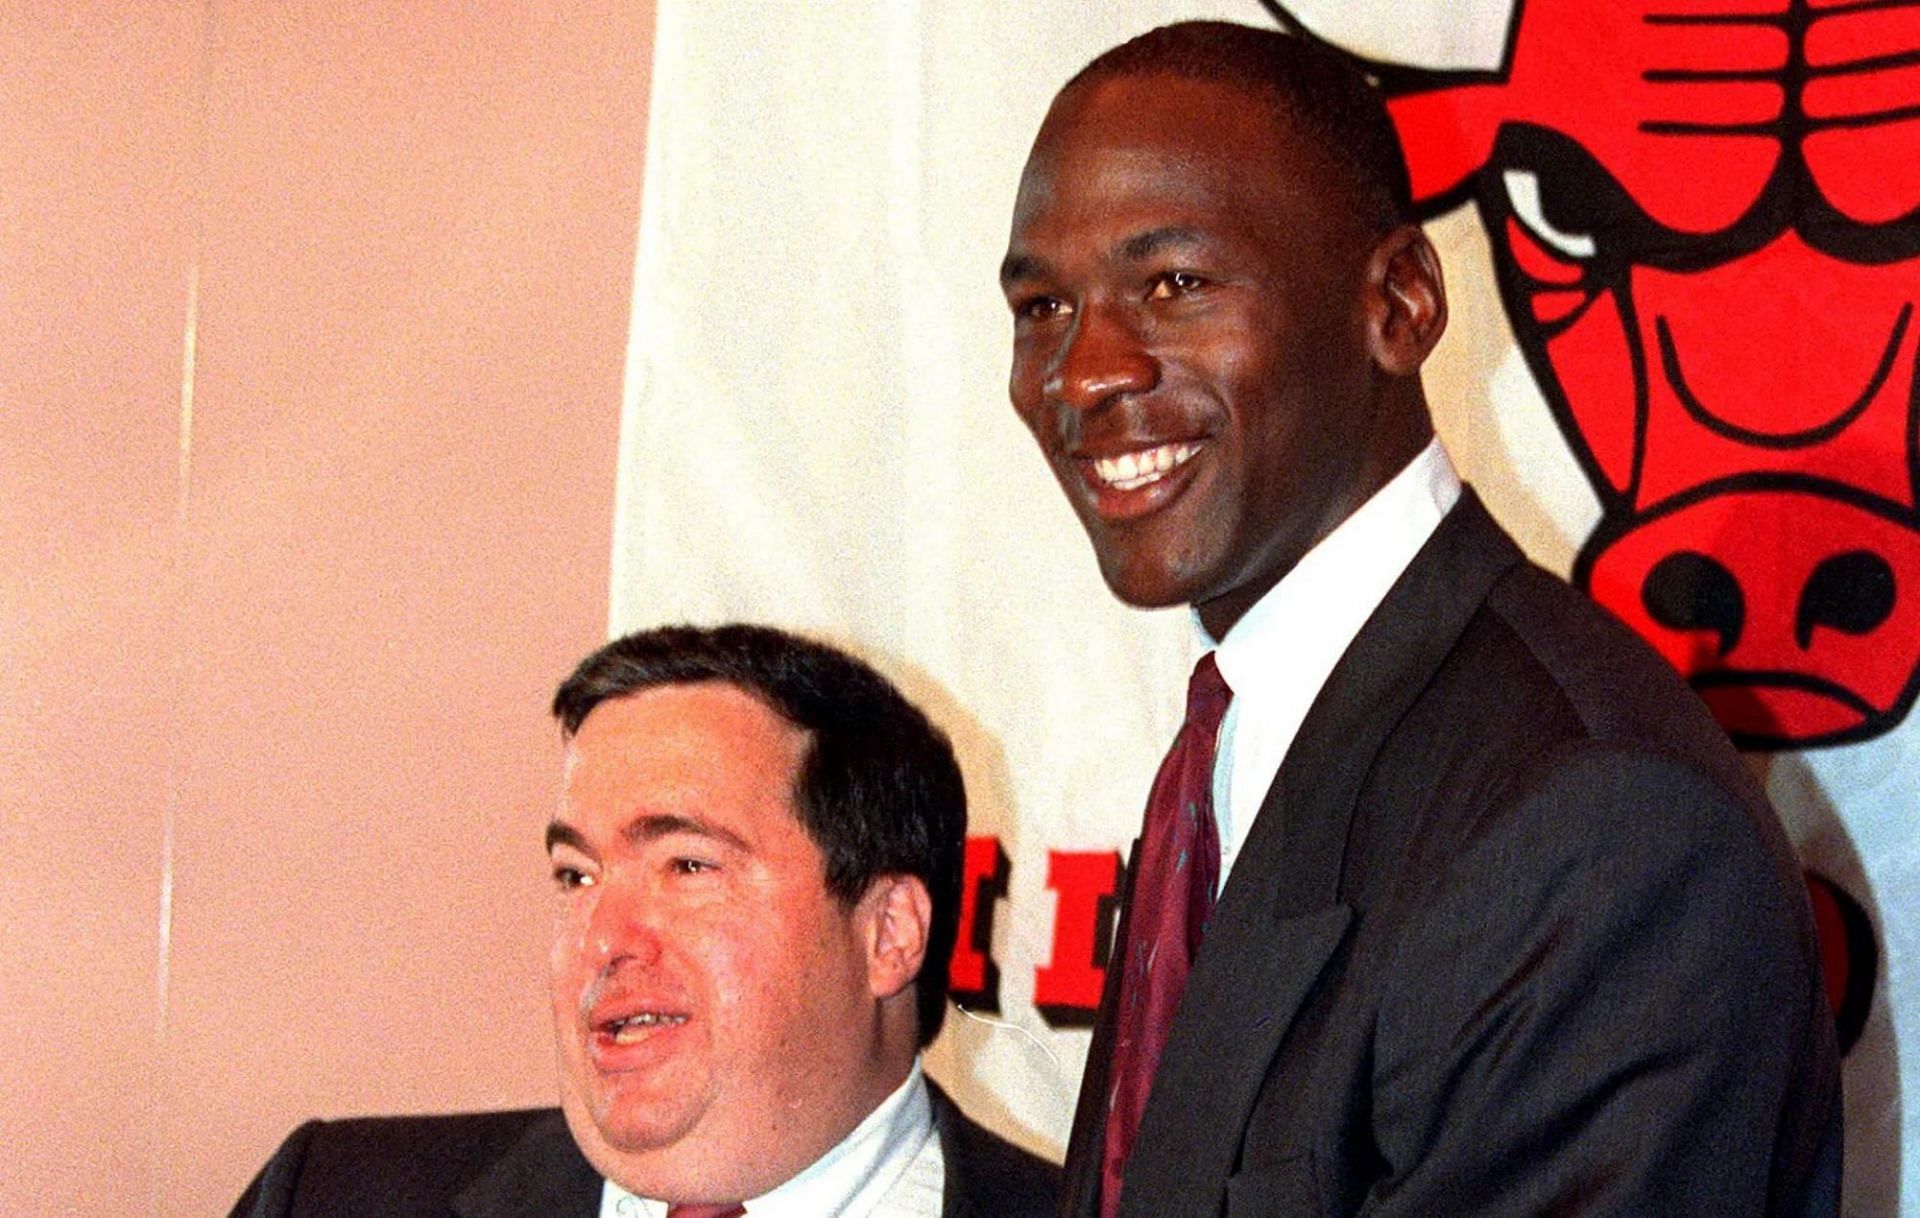 A book published in 2000 bares how the Jerry Krause and Michael Jordan grudge began